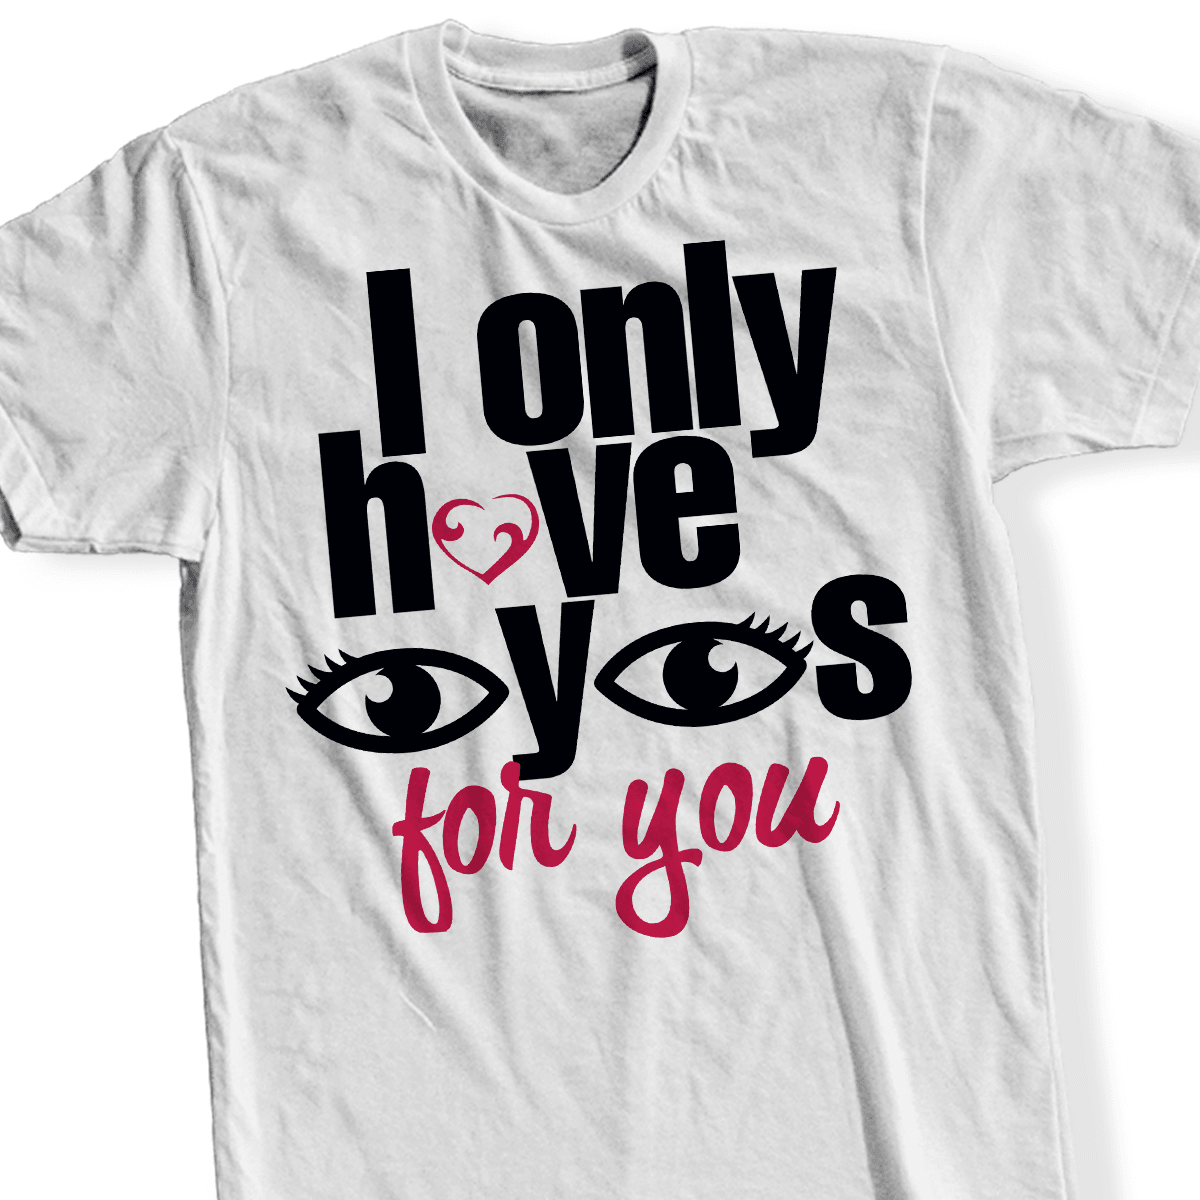 Designs by MyUtopia Shout Out:I Only Have Eyes For You - T Shirt,Short Sleeve / White / Small,Adult Unisex T-Shirt